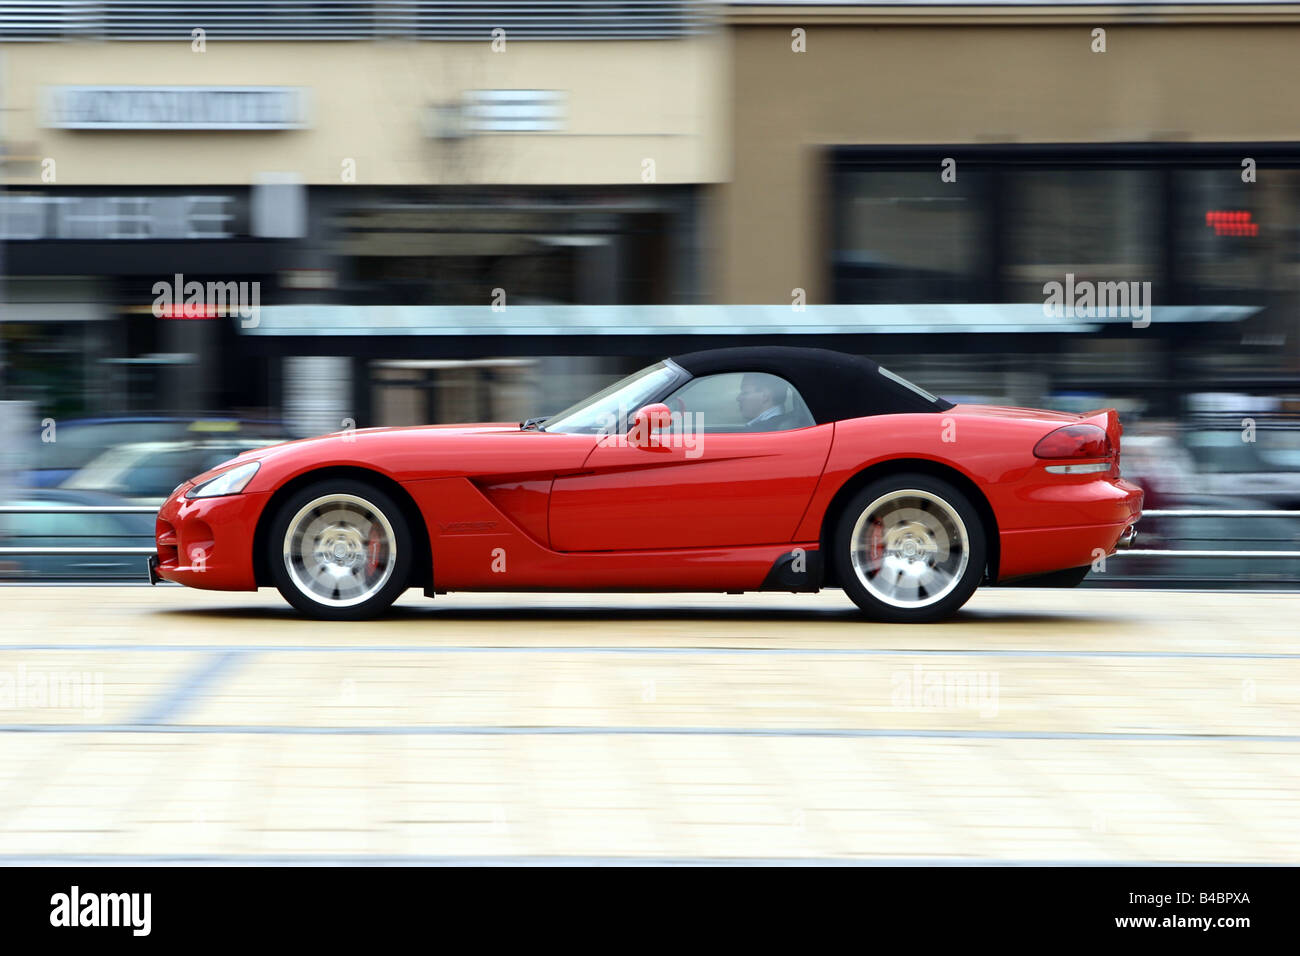 Car, Dodge Viper SRT-10, Convertible, model year 2003-, red, FGHDS, closed top, driving, side view, City Stock Photo